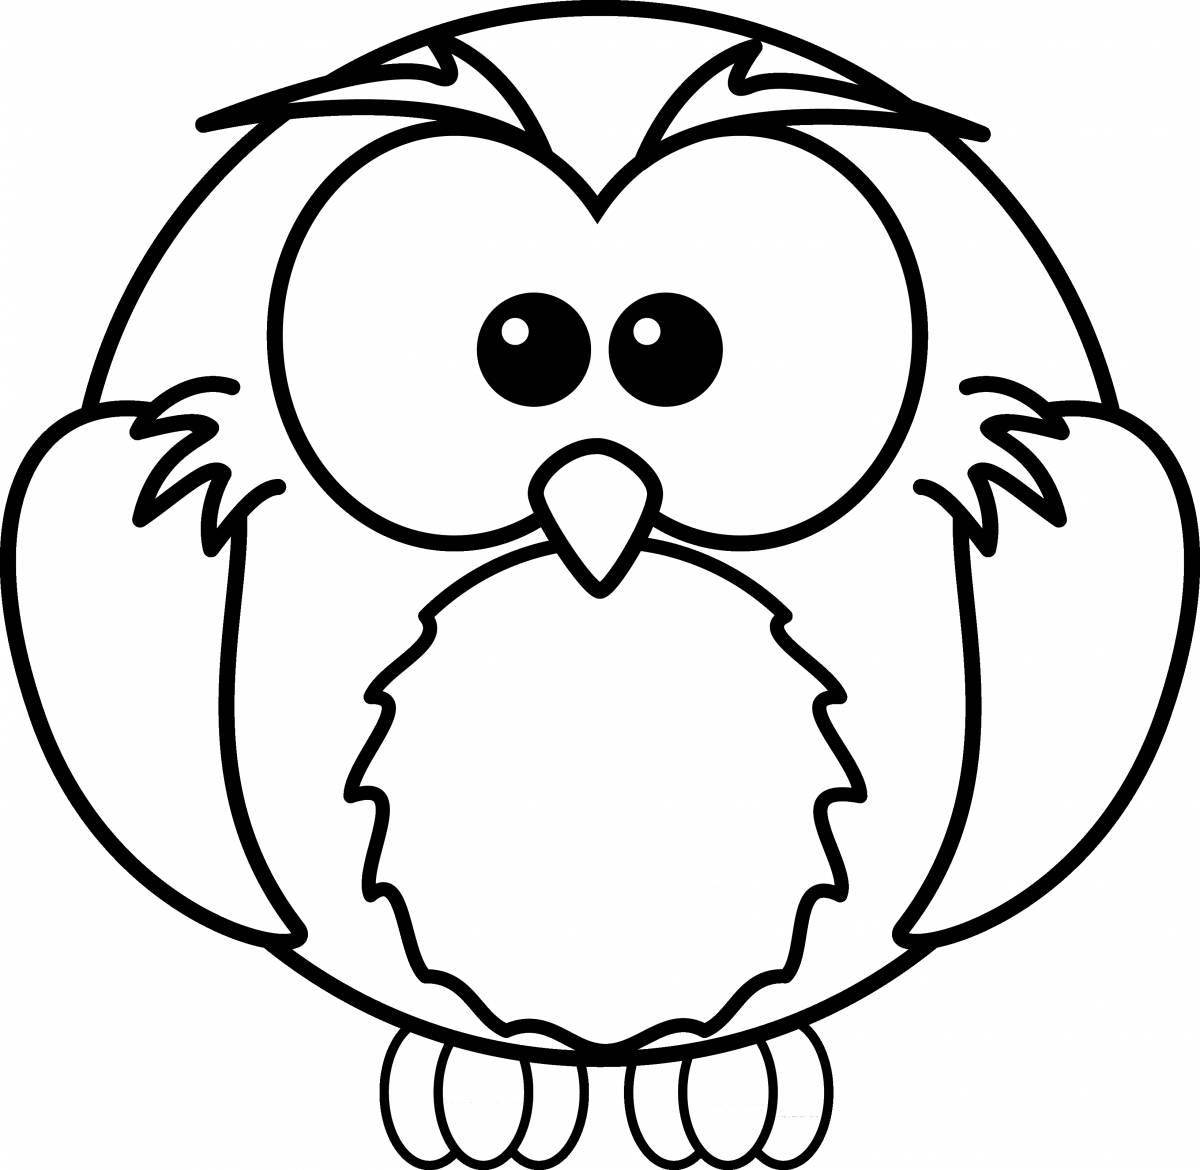 Snowy Owl Coloring Page